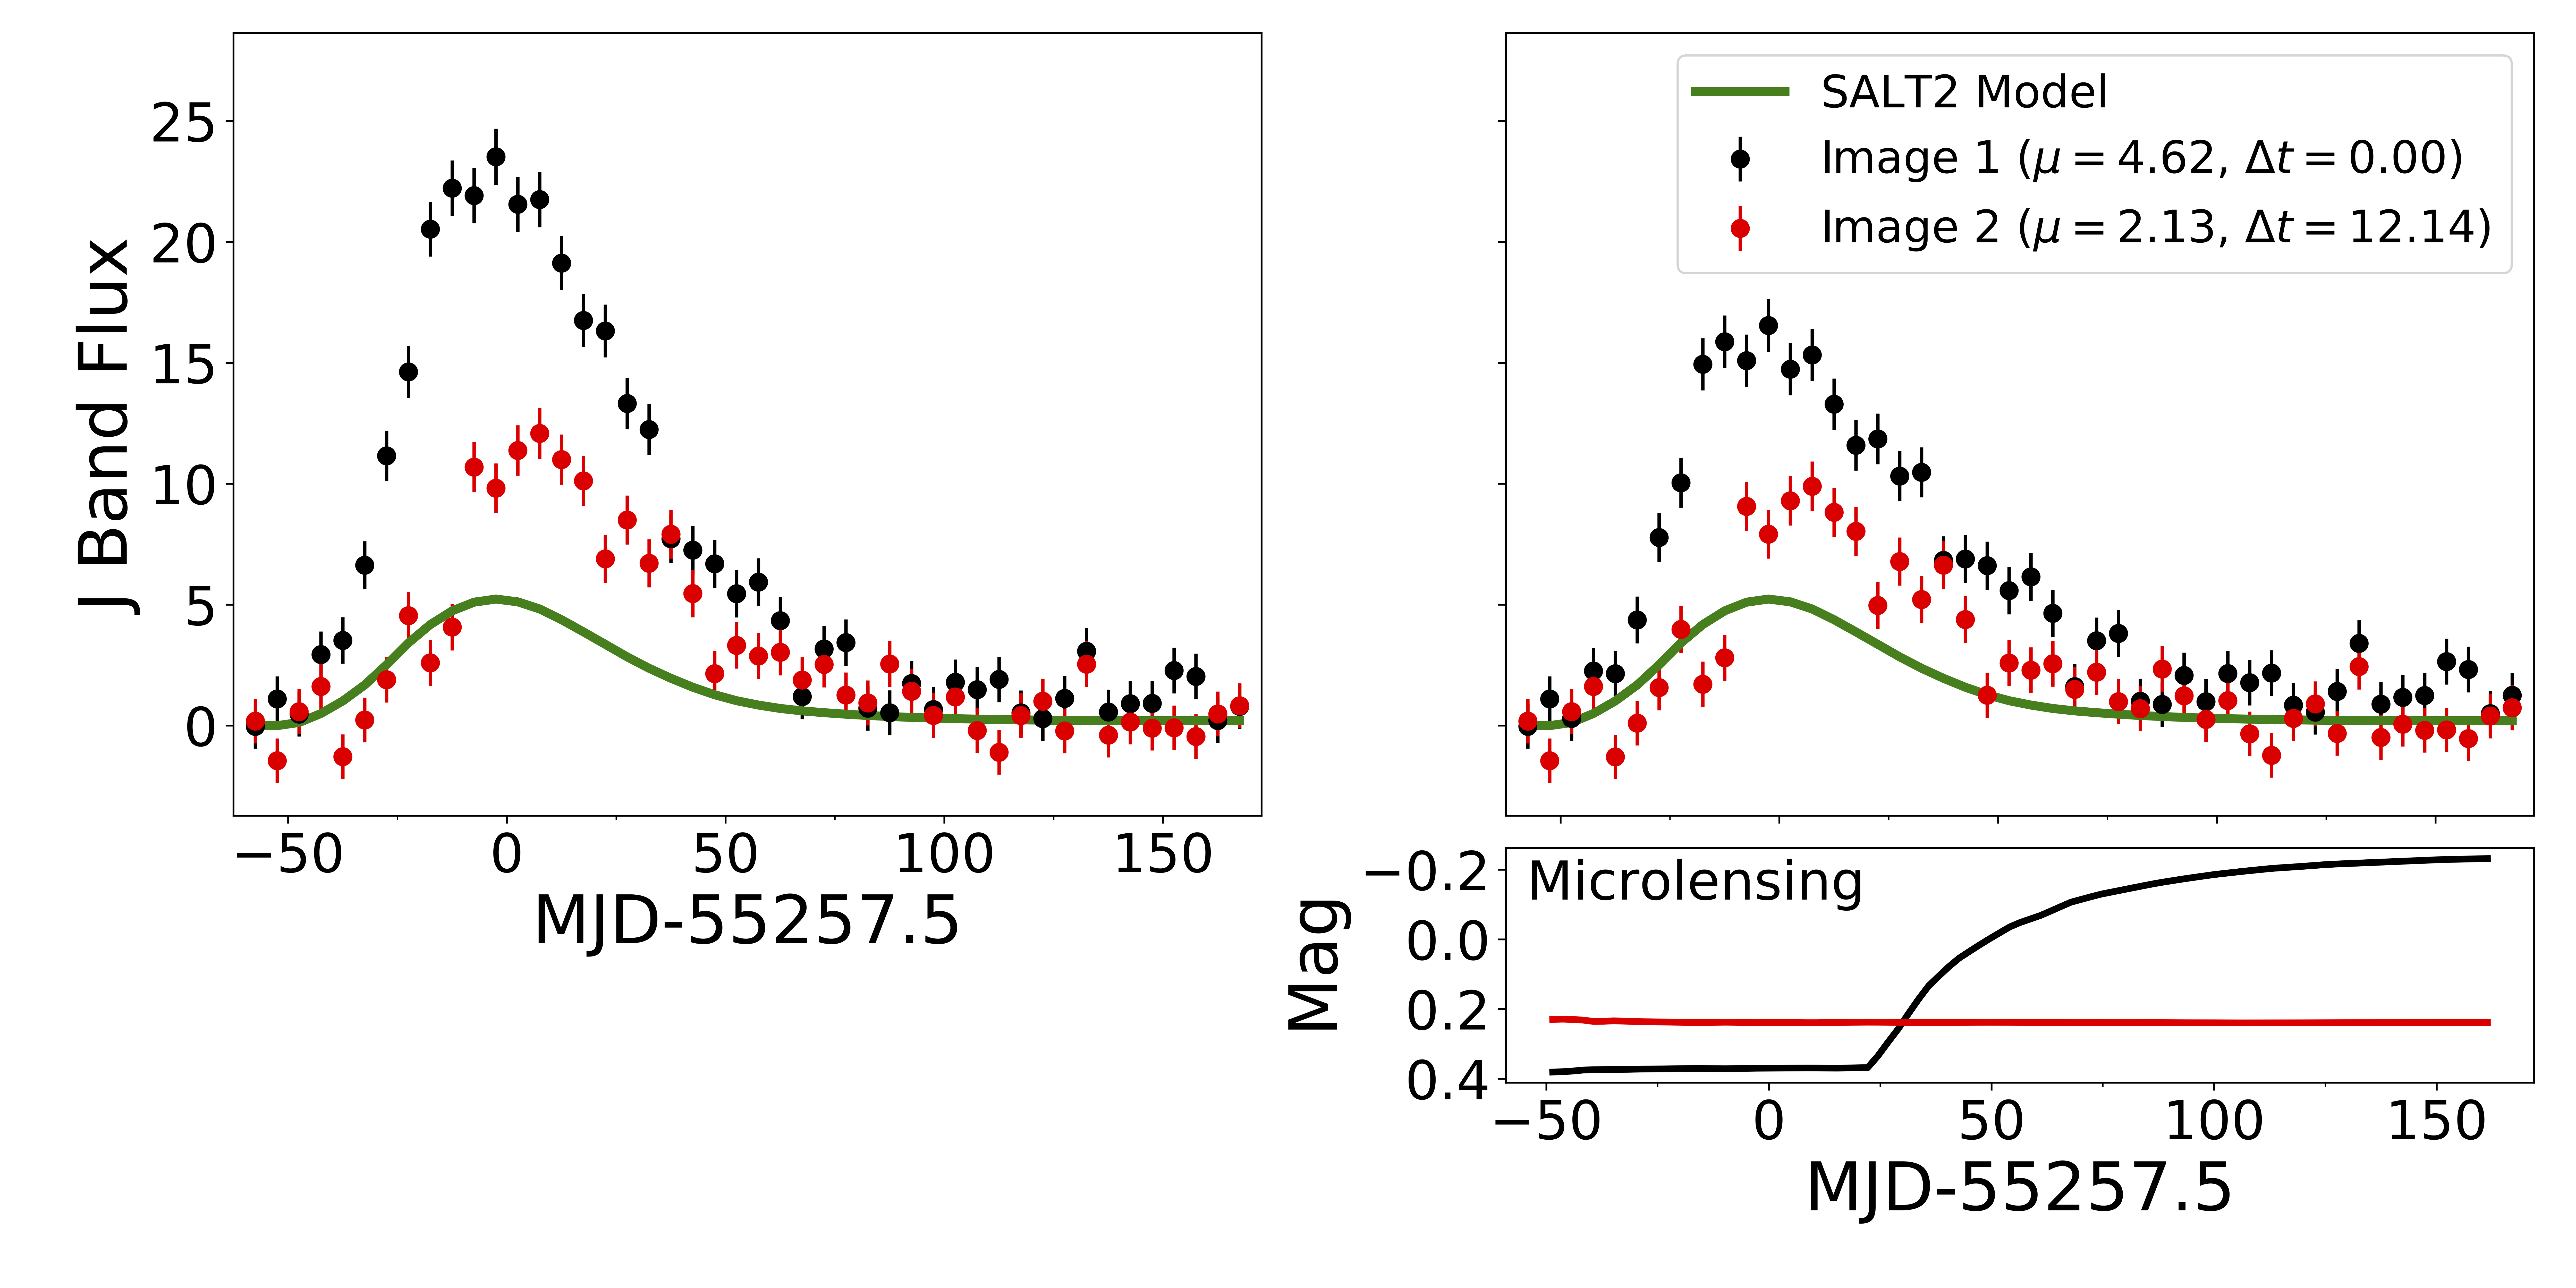 Left has plot showing J band flux as a function of time of SN1a with macro-lensing. Upper right has same SN1a light curve but with microlensing from Pierel et al. 2021 applied. Lower right shows microlensing curve in magnitudes as a function of time.